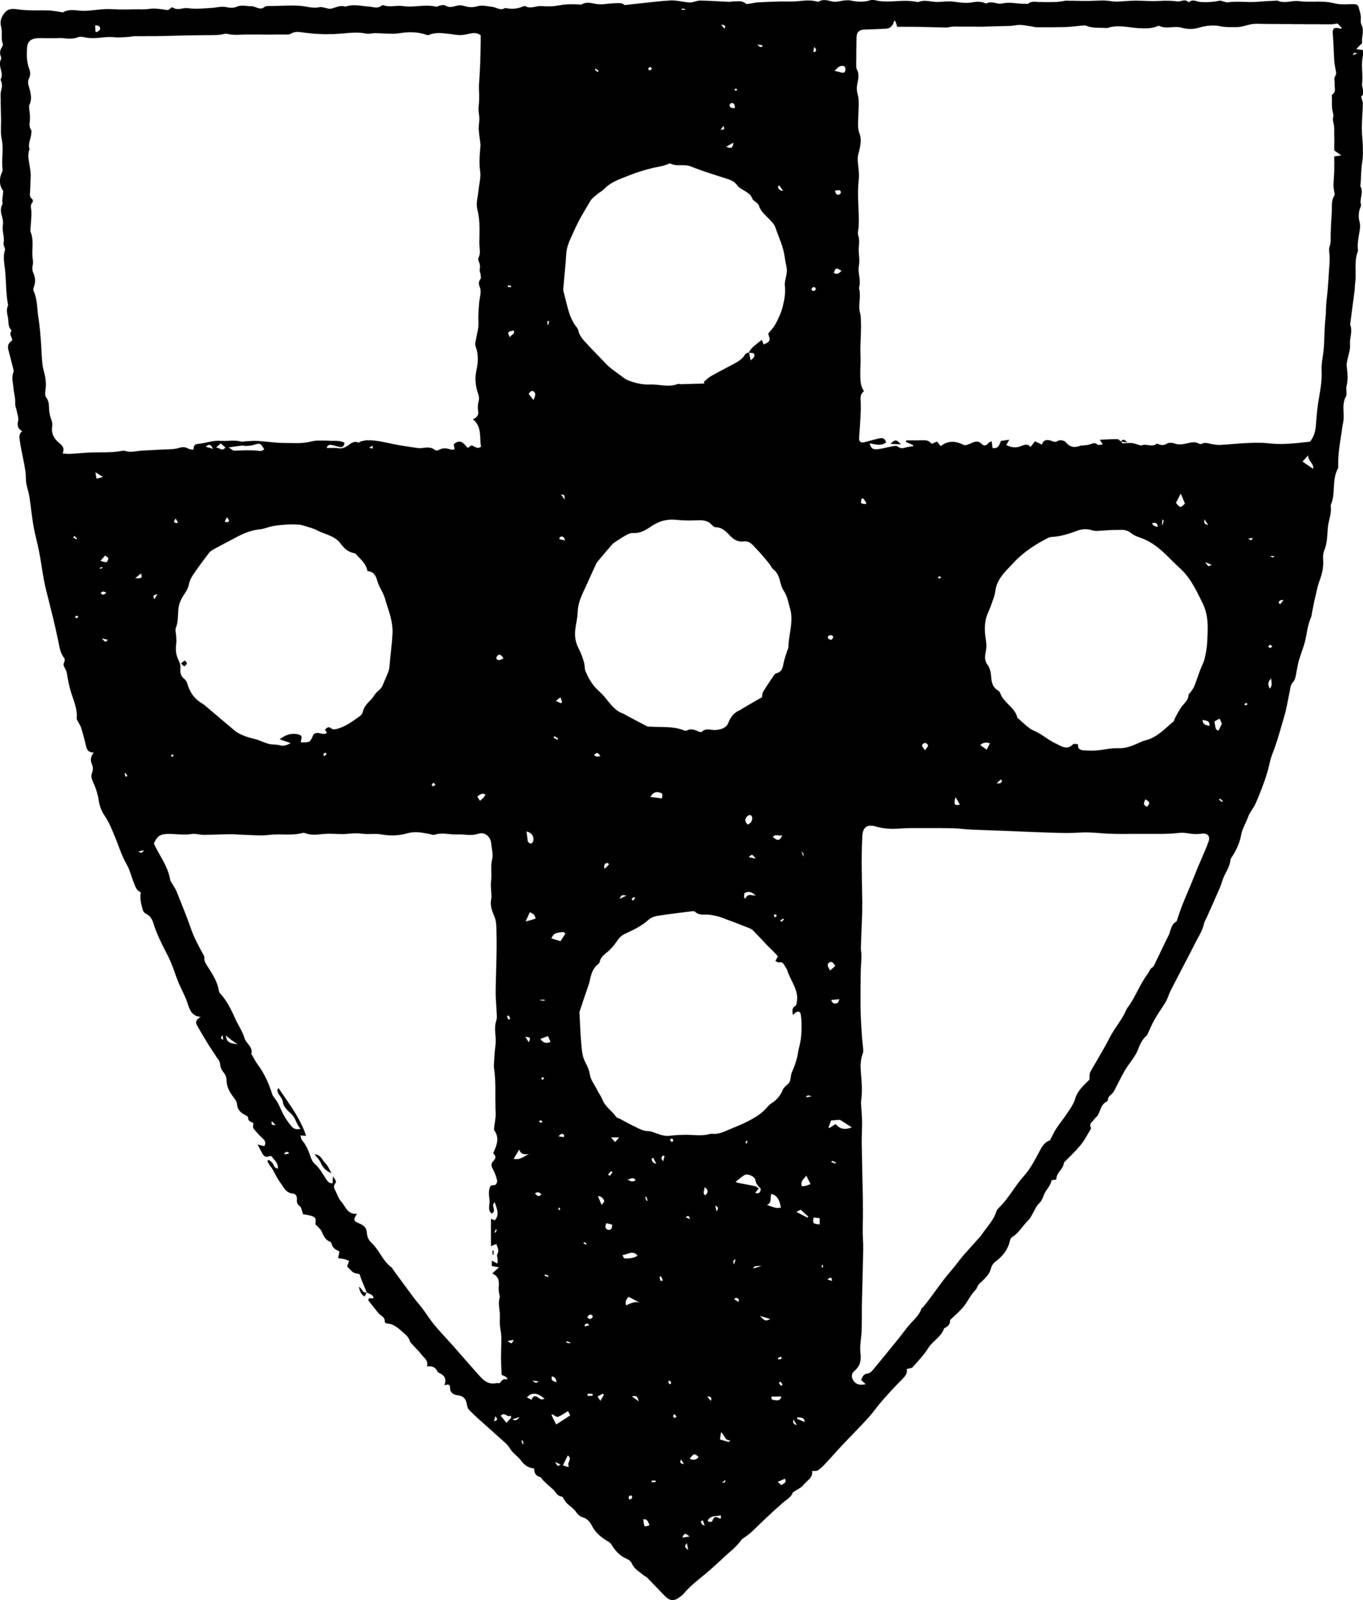 Shield with Roundels is an example of a heraldic shield with roundels vintage line drawing or engraving illustration.